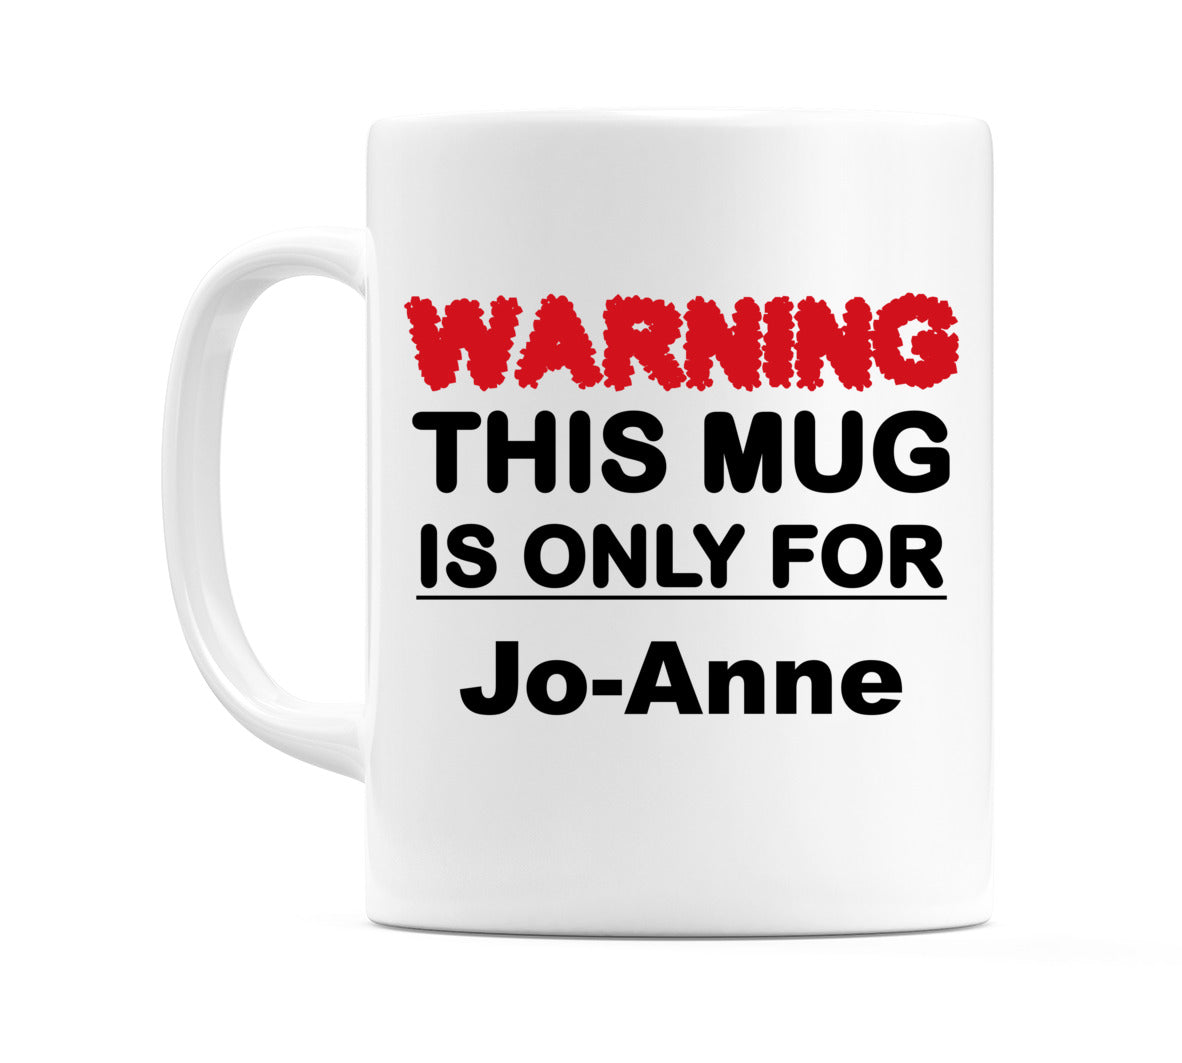 Warning This Mug is ONLY for Jo-Anne Mug